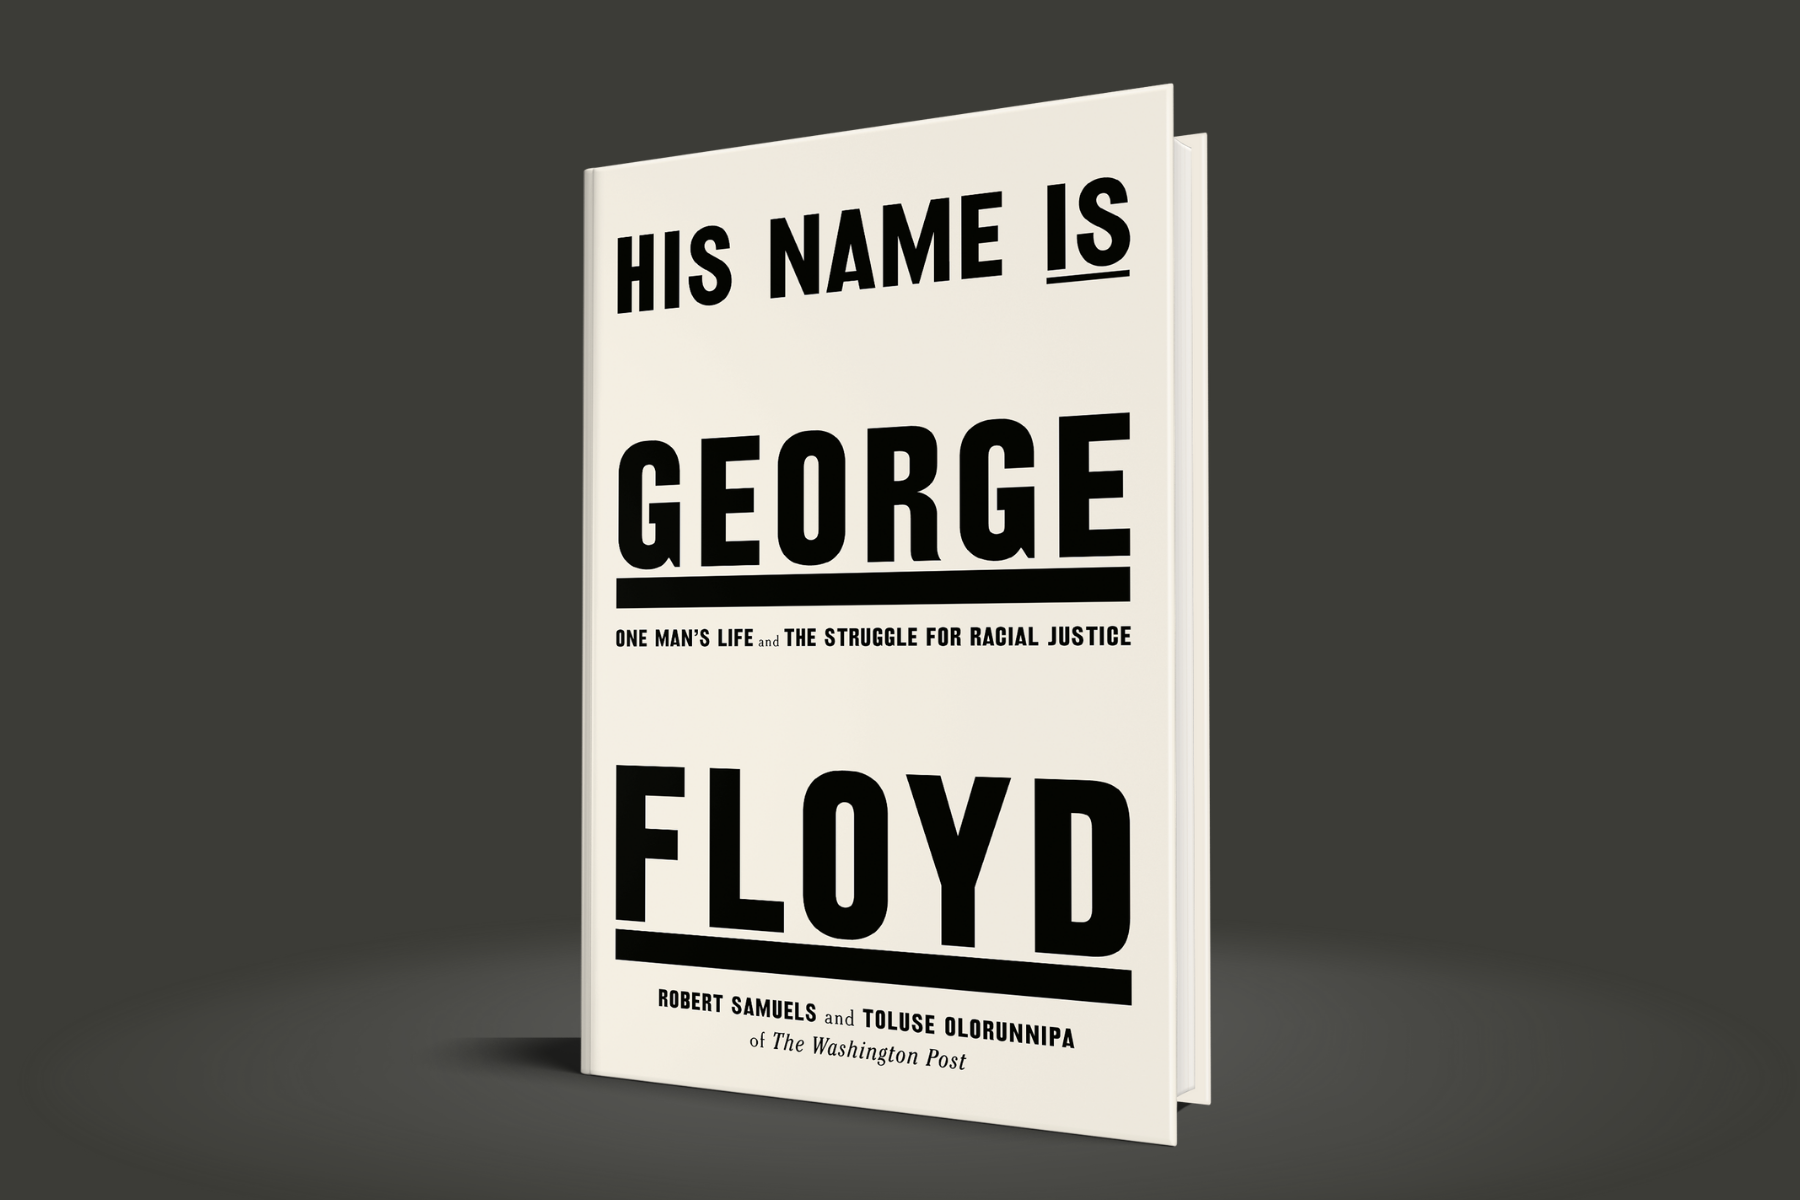 A photo of the book His Name was George Floyd against a black background